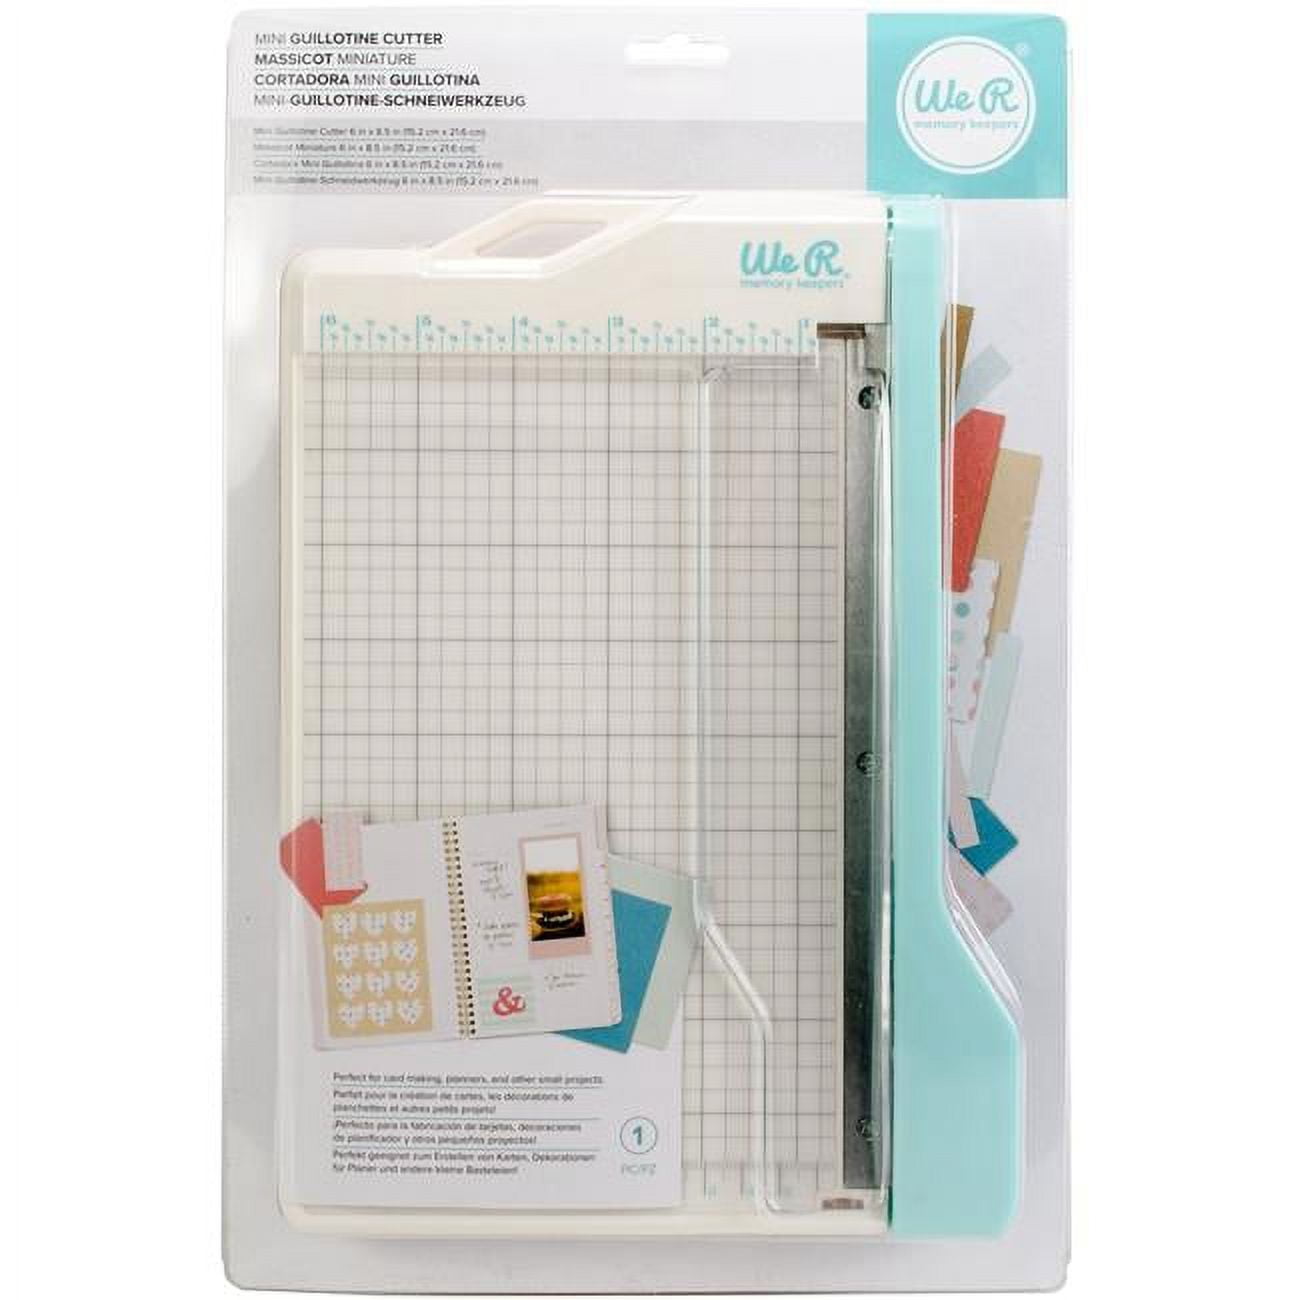 Strathmore® 300 Series Wired Drawing Paper Pad, 50 Sheets